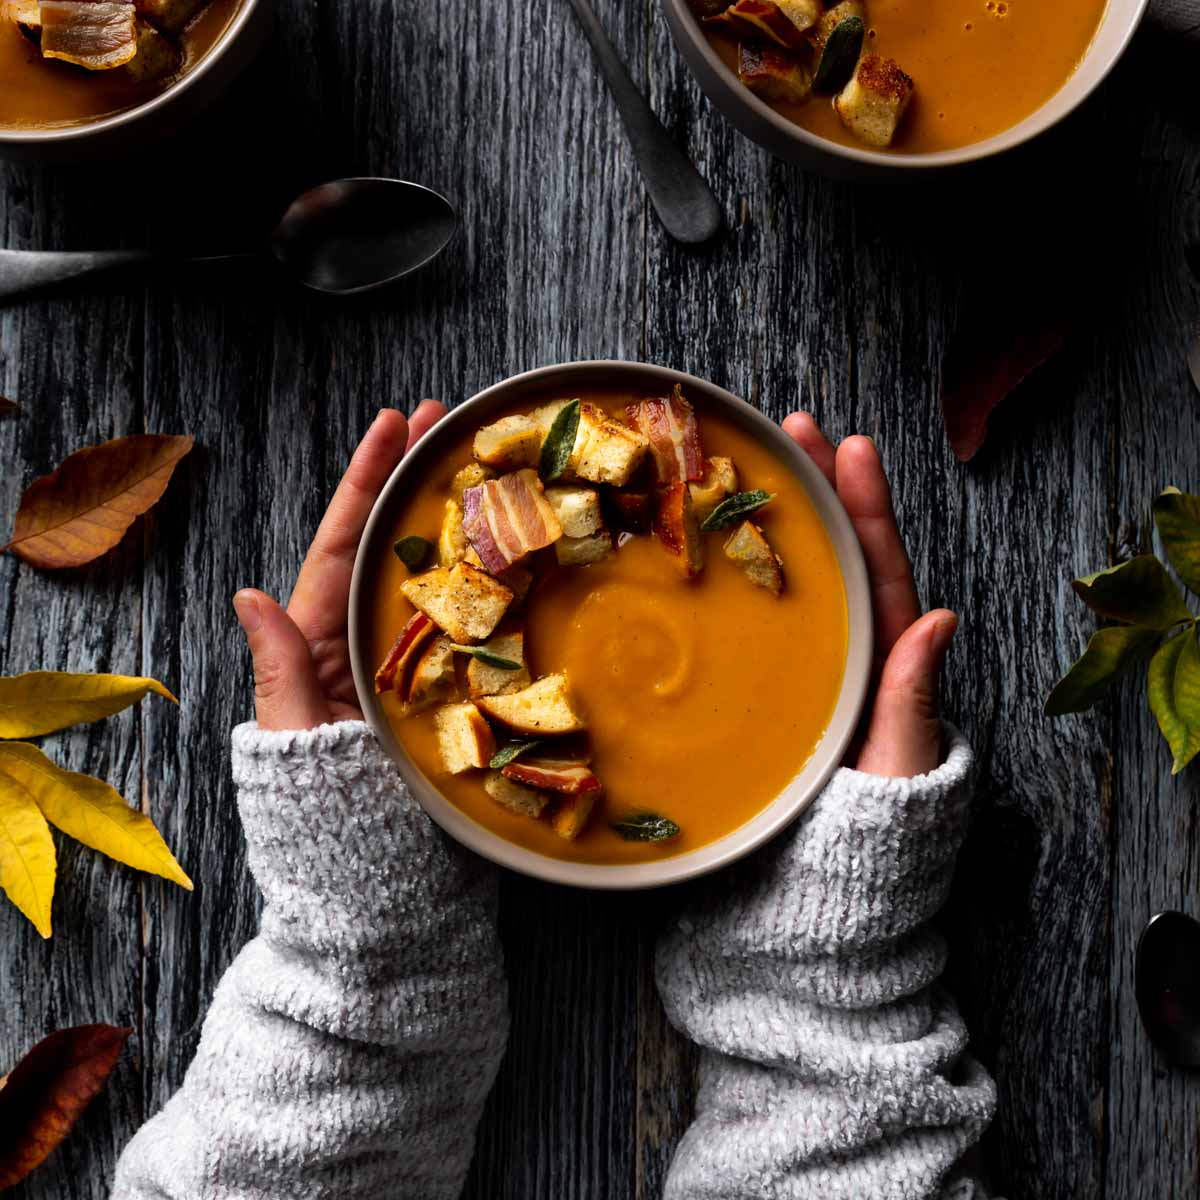 Arms in a knitted sweater cradling a big bowl of sweet potato and pumpkin soup topped with croutons, sage leaves and pancetta.